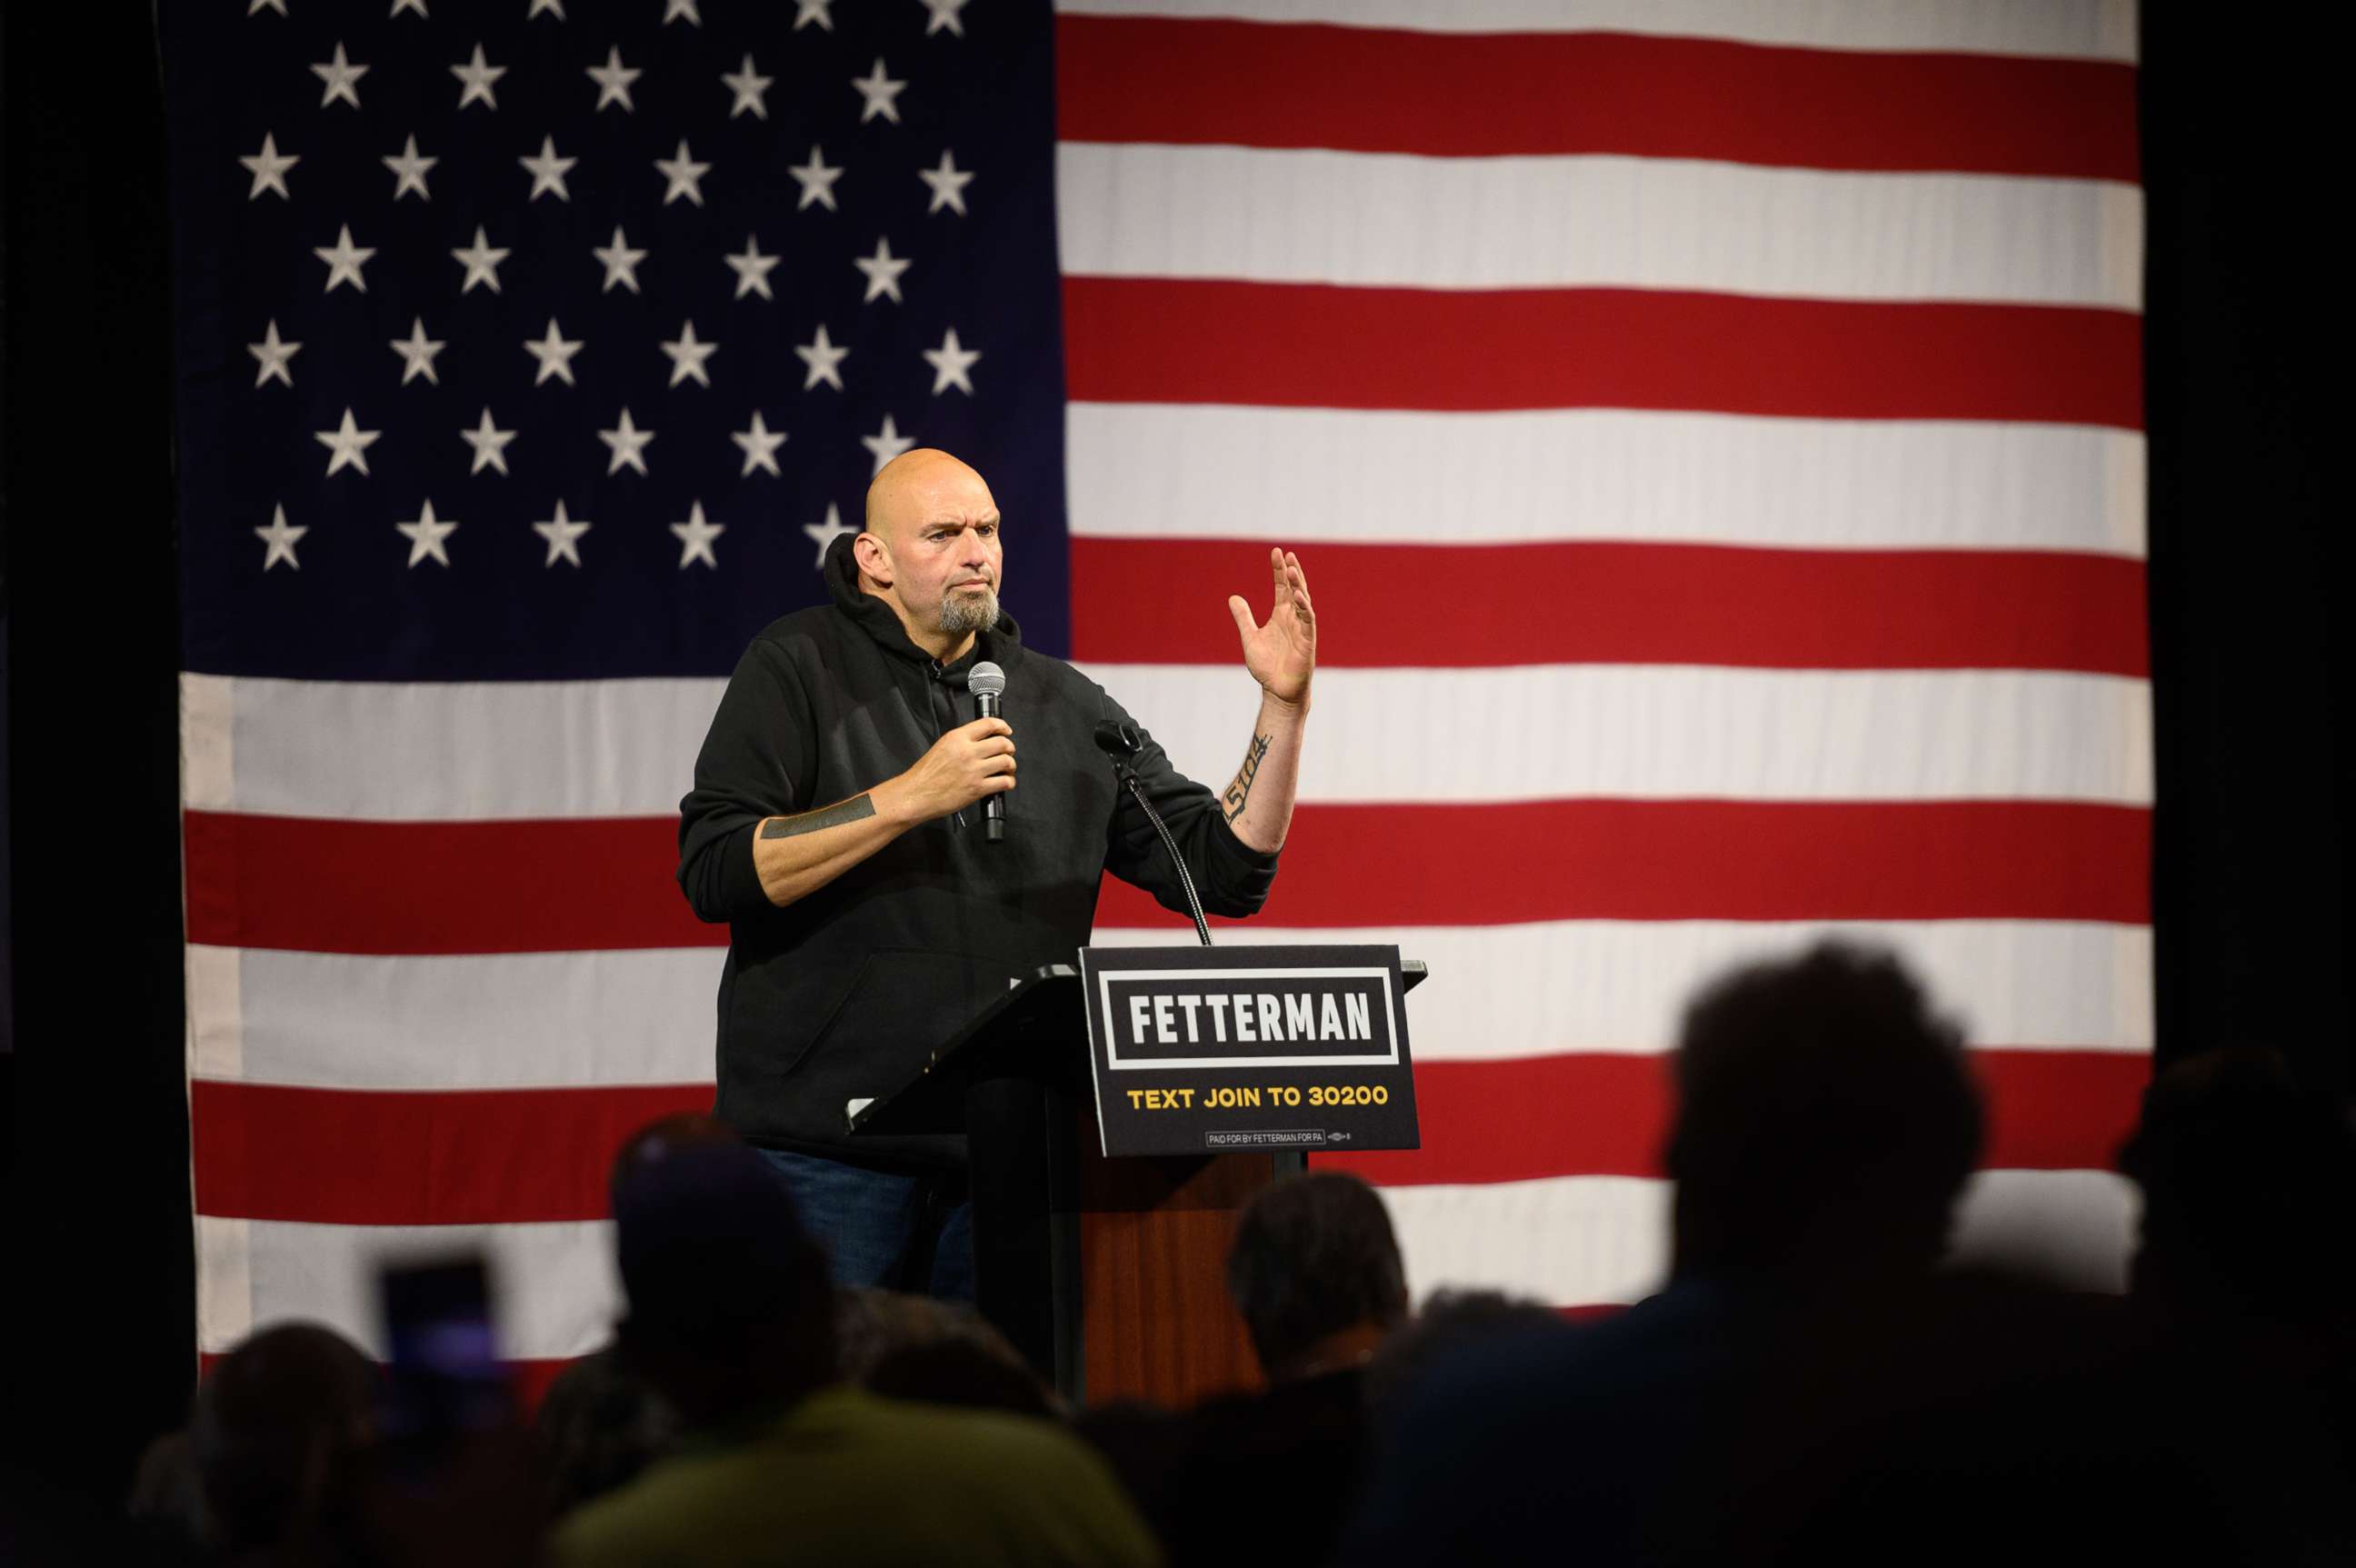 PHOTO: John Fetterman, lieutenant governor of Pennsylvania and Democratic senate candidate, speaks during a campaign rally in Erie, Penn., Aug. 12, 2022.